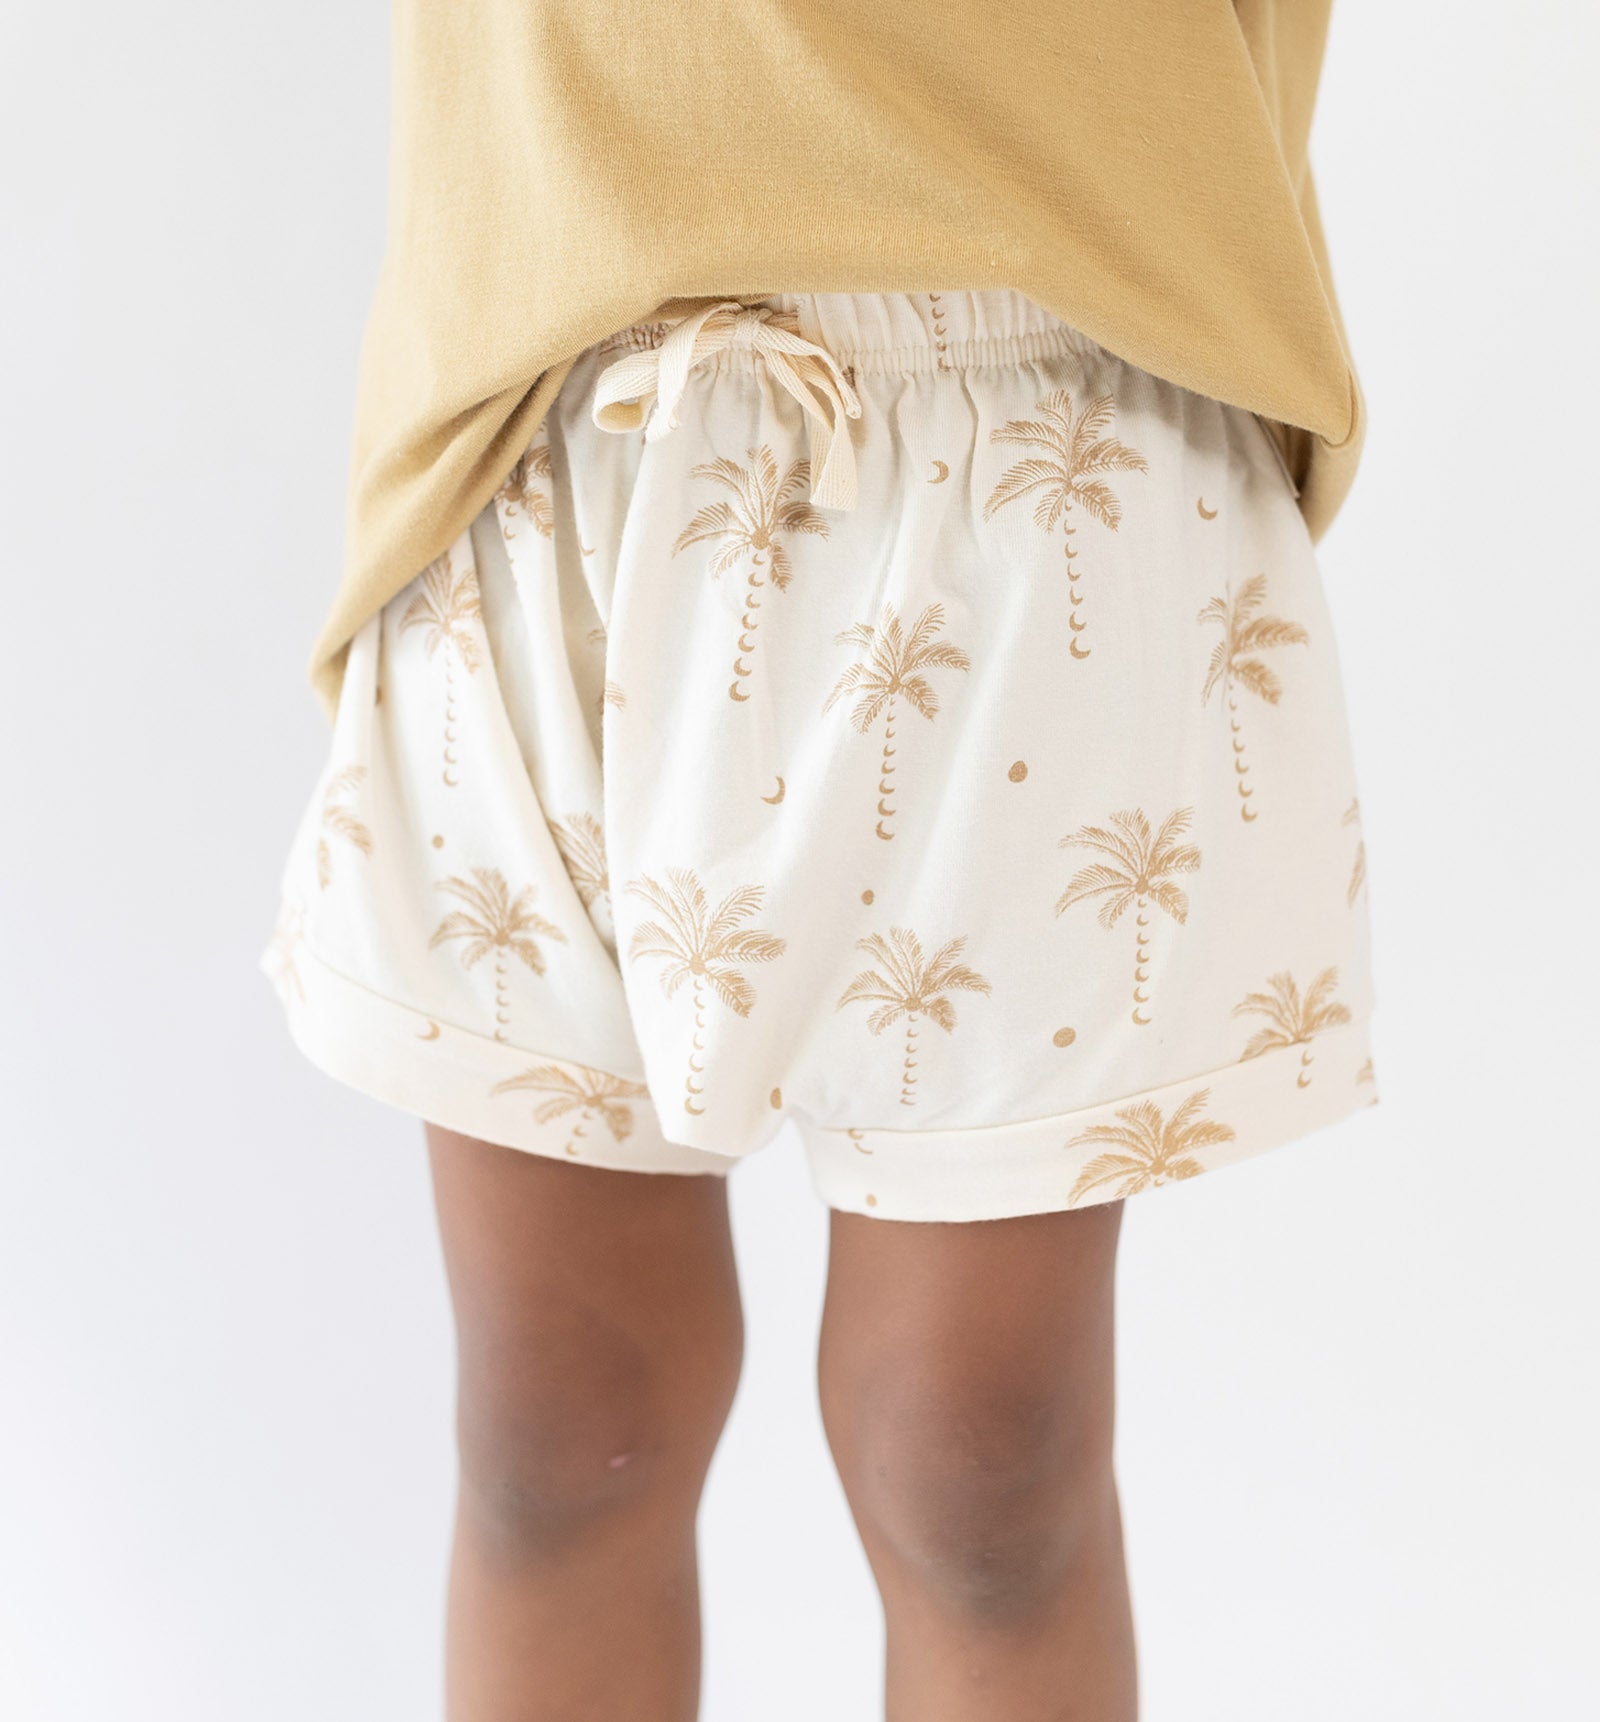 Oasis moon elasticated shorties by Bam Loves Boo